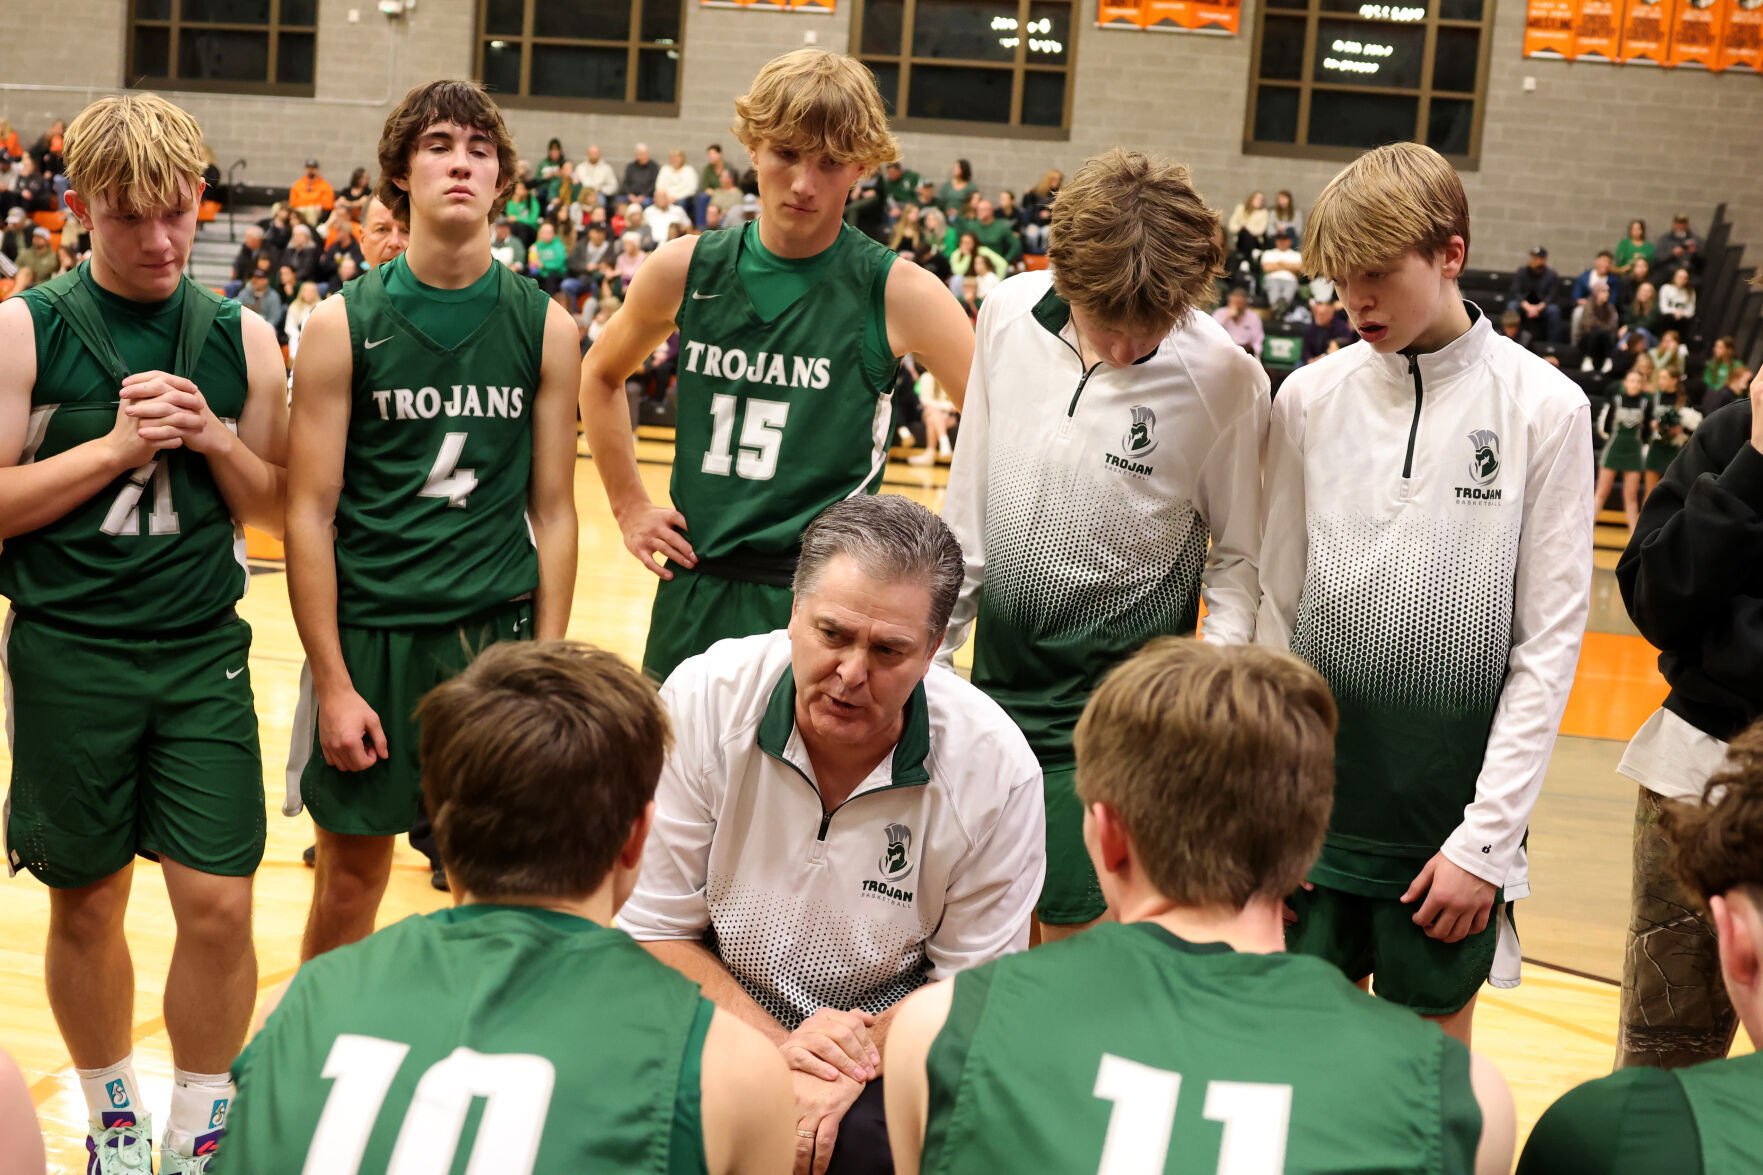 KW basketball coach Randy Roden takes over Trojans’ football program with a game plan for success